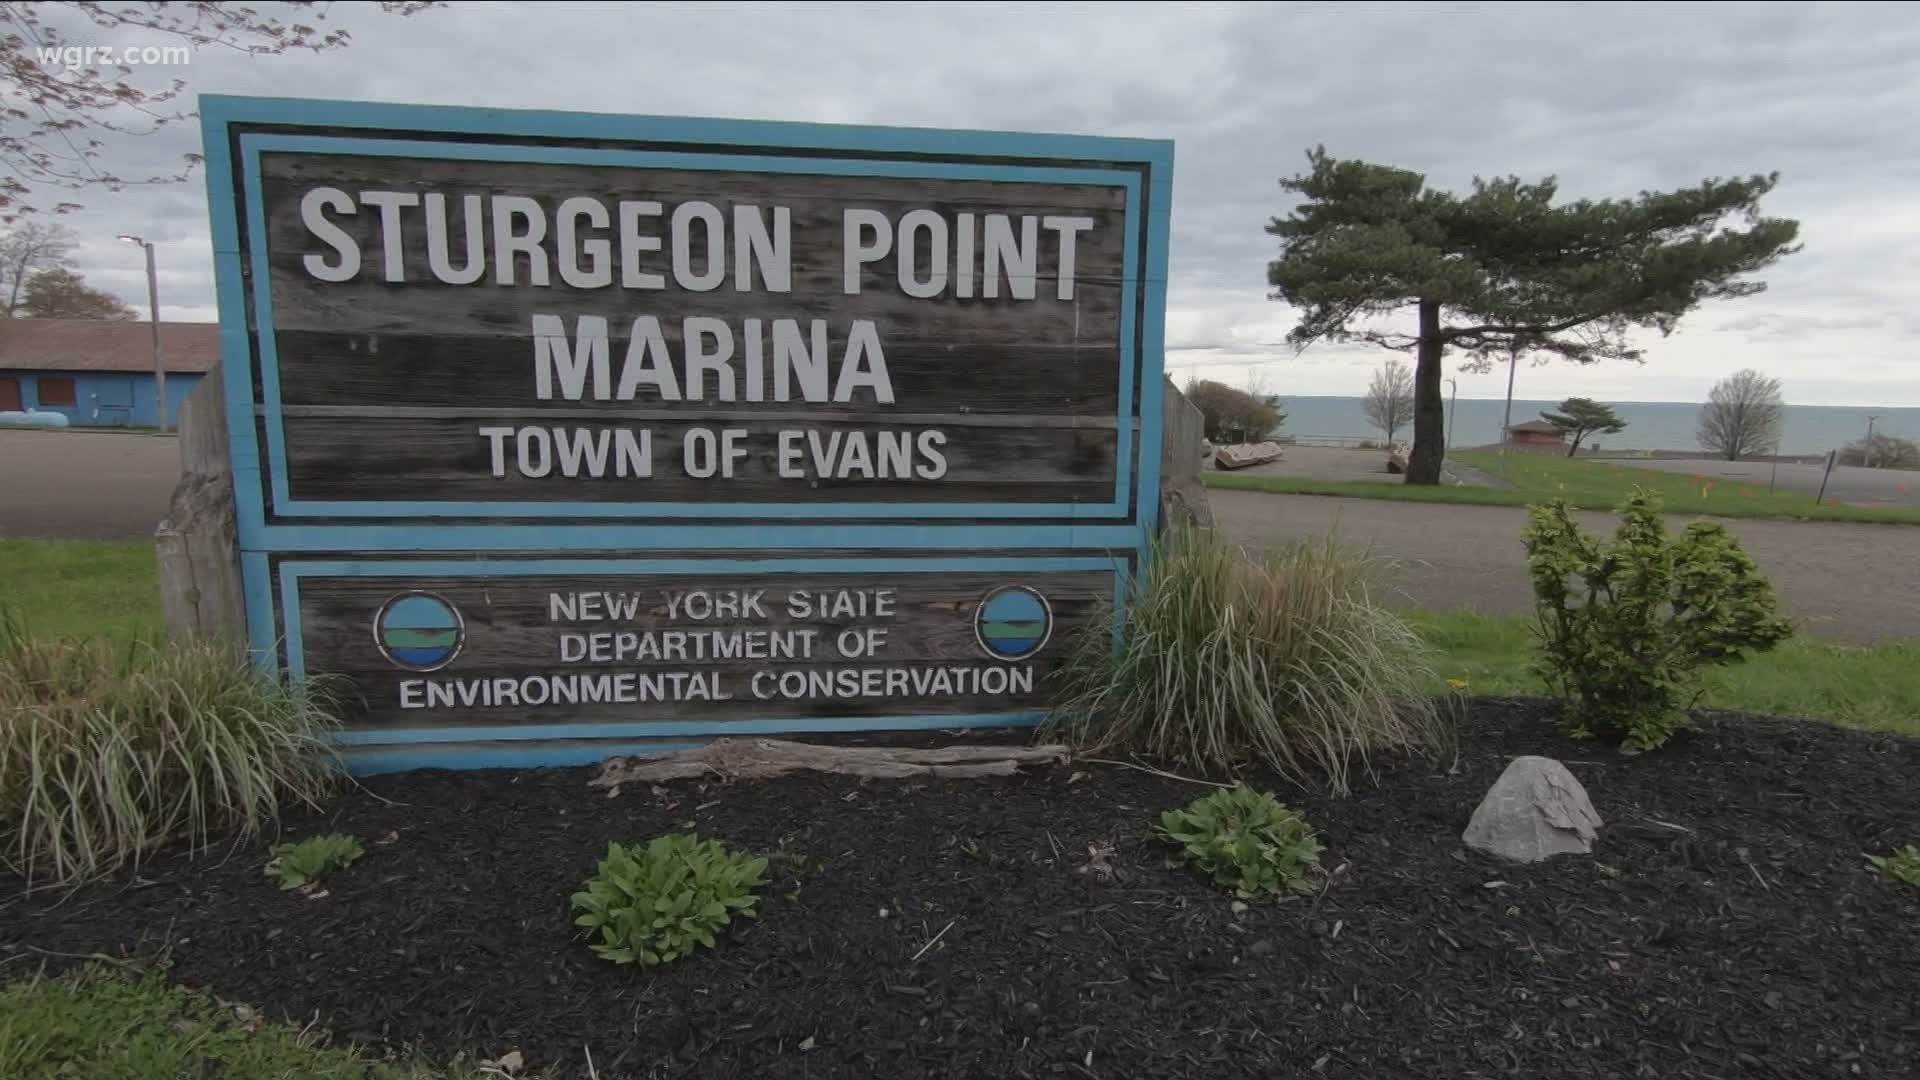 The marina needs extensive dredging in order to reopen, but the Town Supervisor published a notice saying it may remain closed for the season.